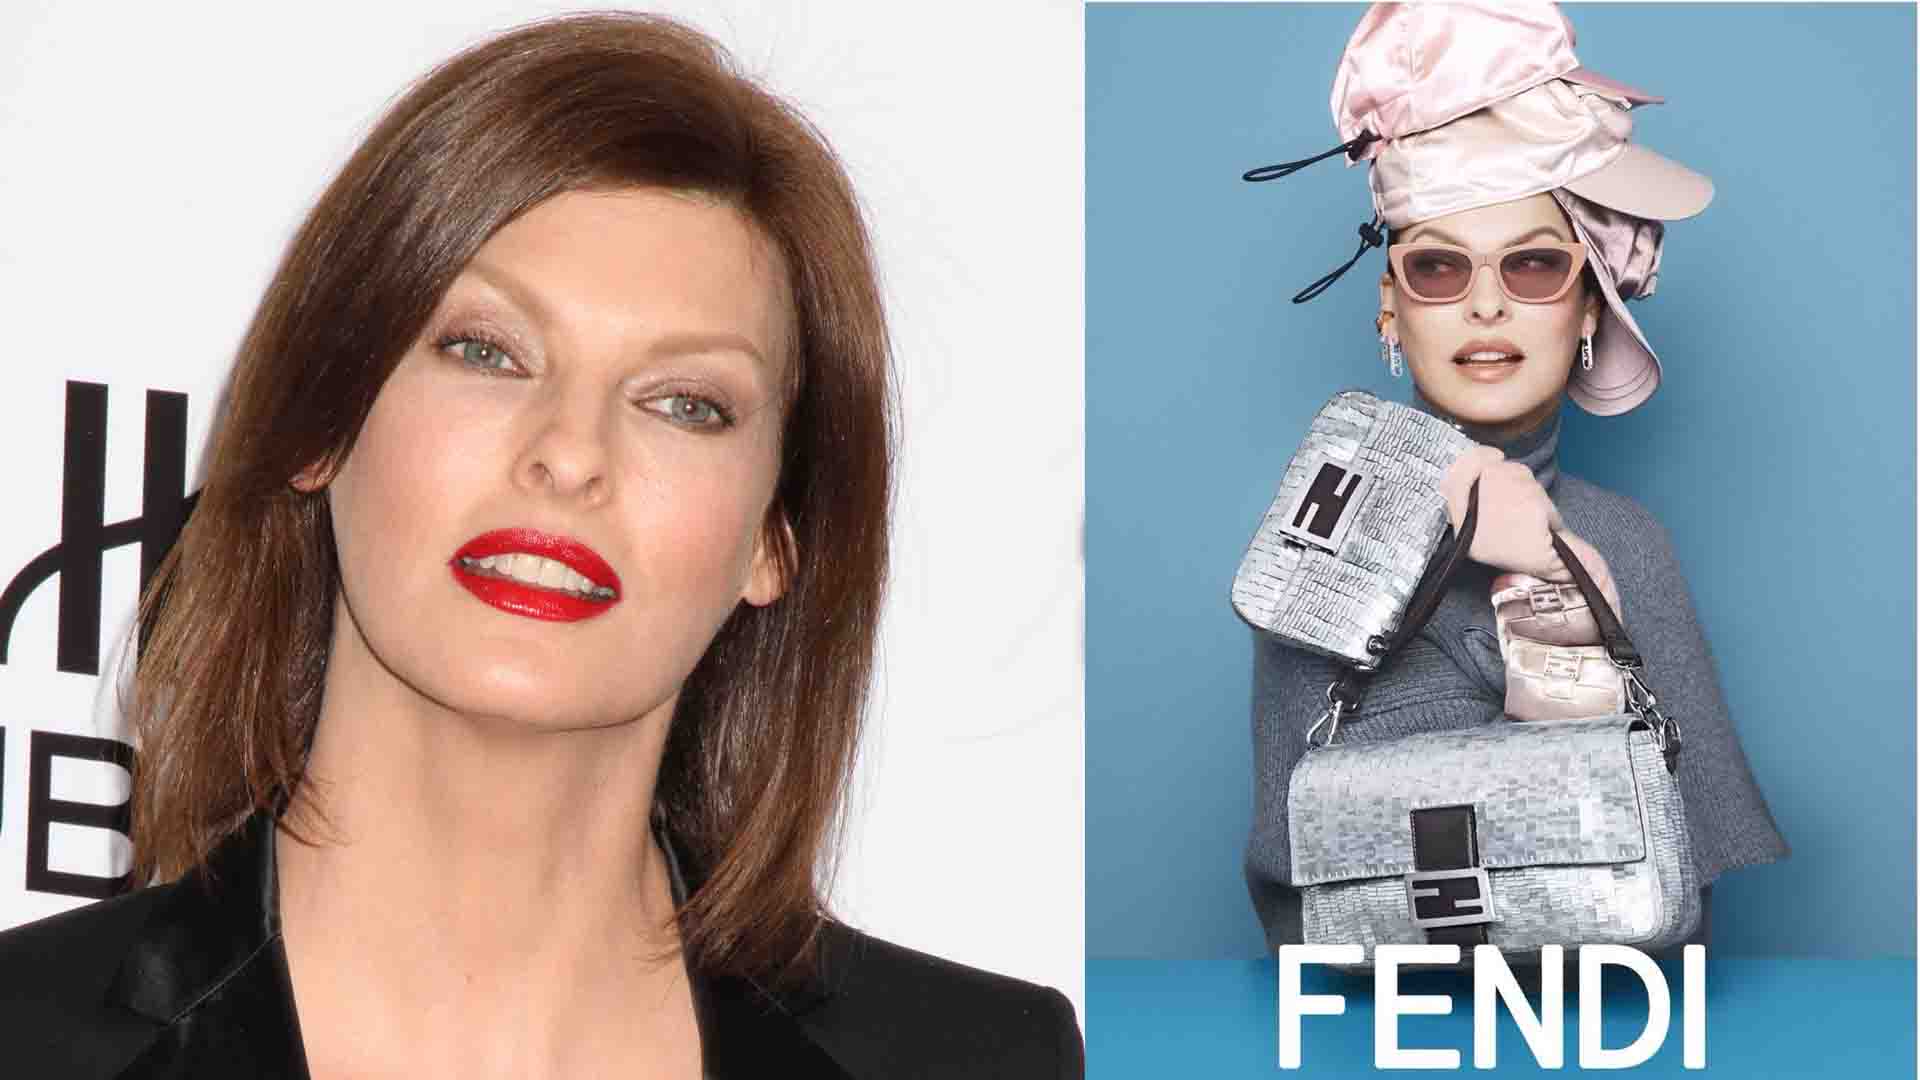 Linda Evangelista Talks Iconic '80s Haircut in 'The Super Models